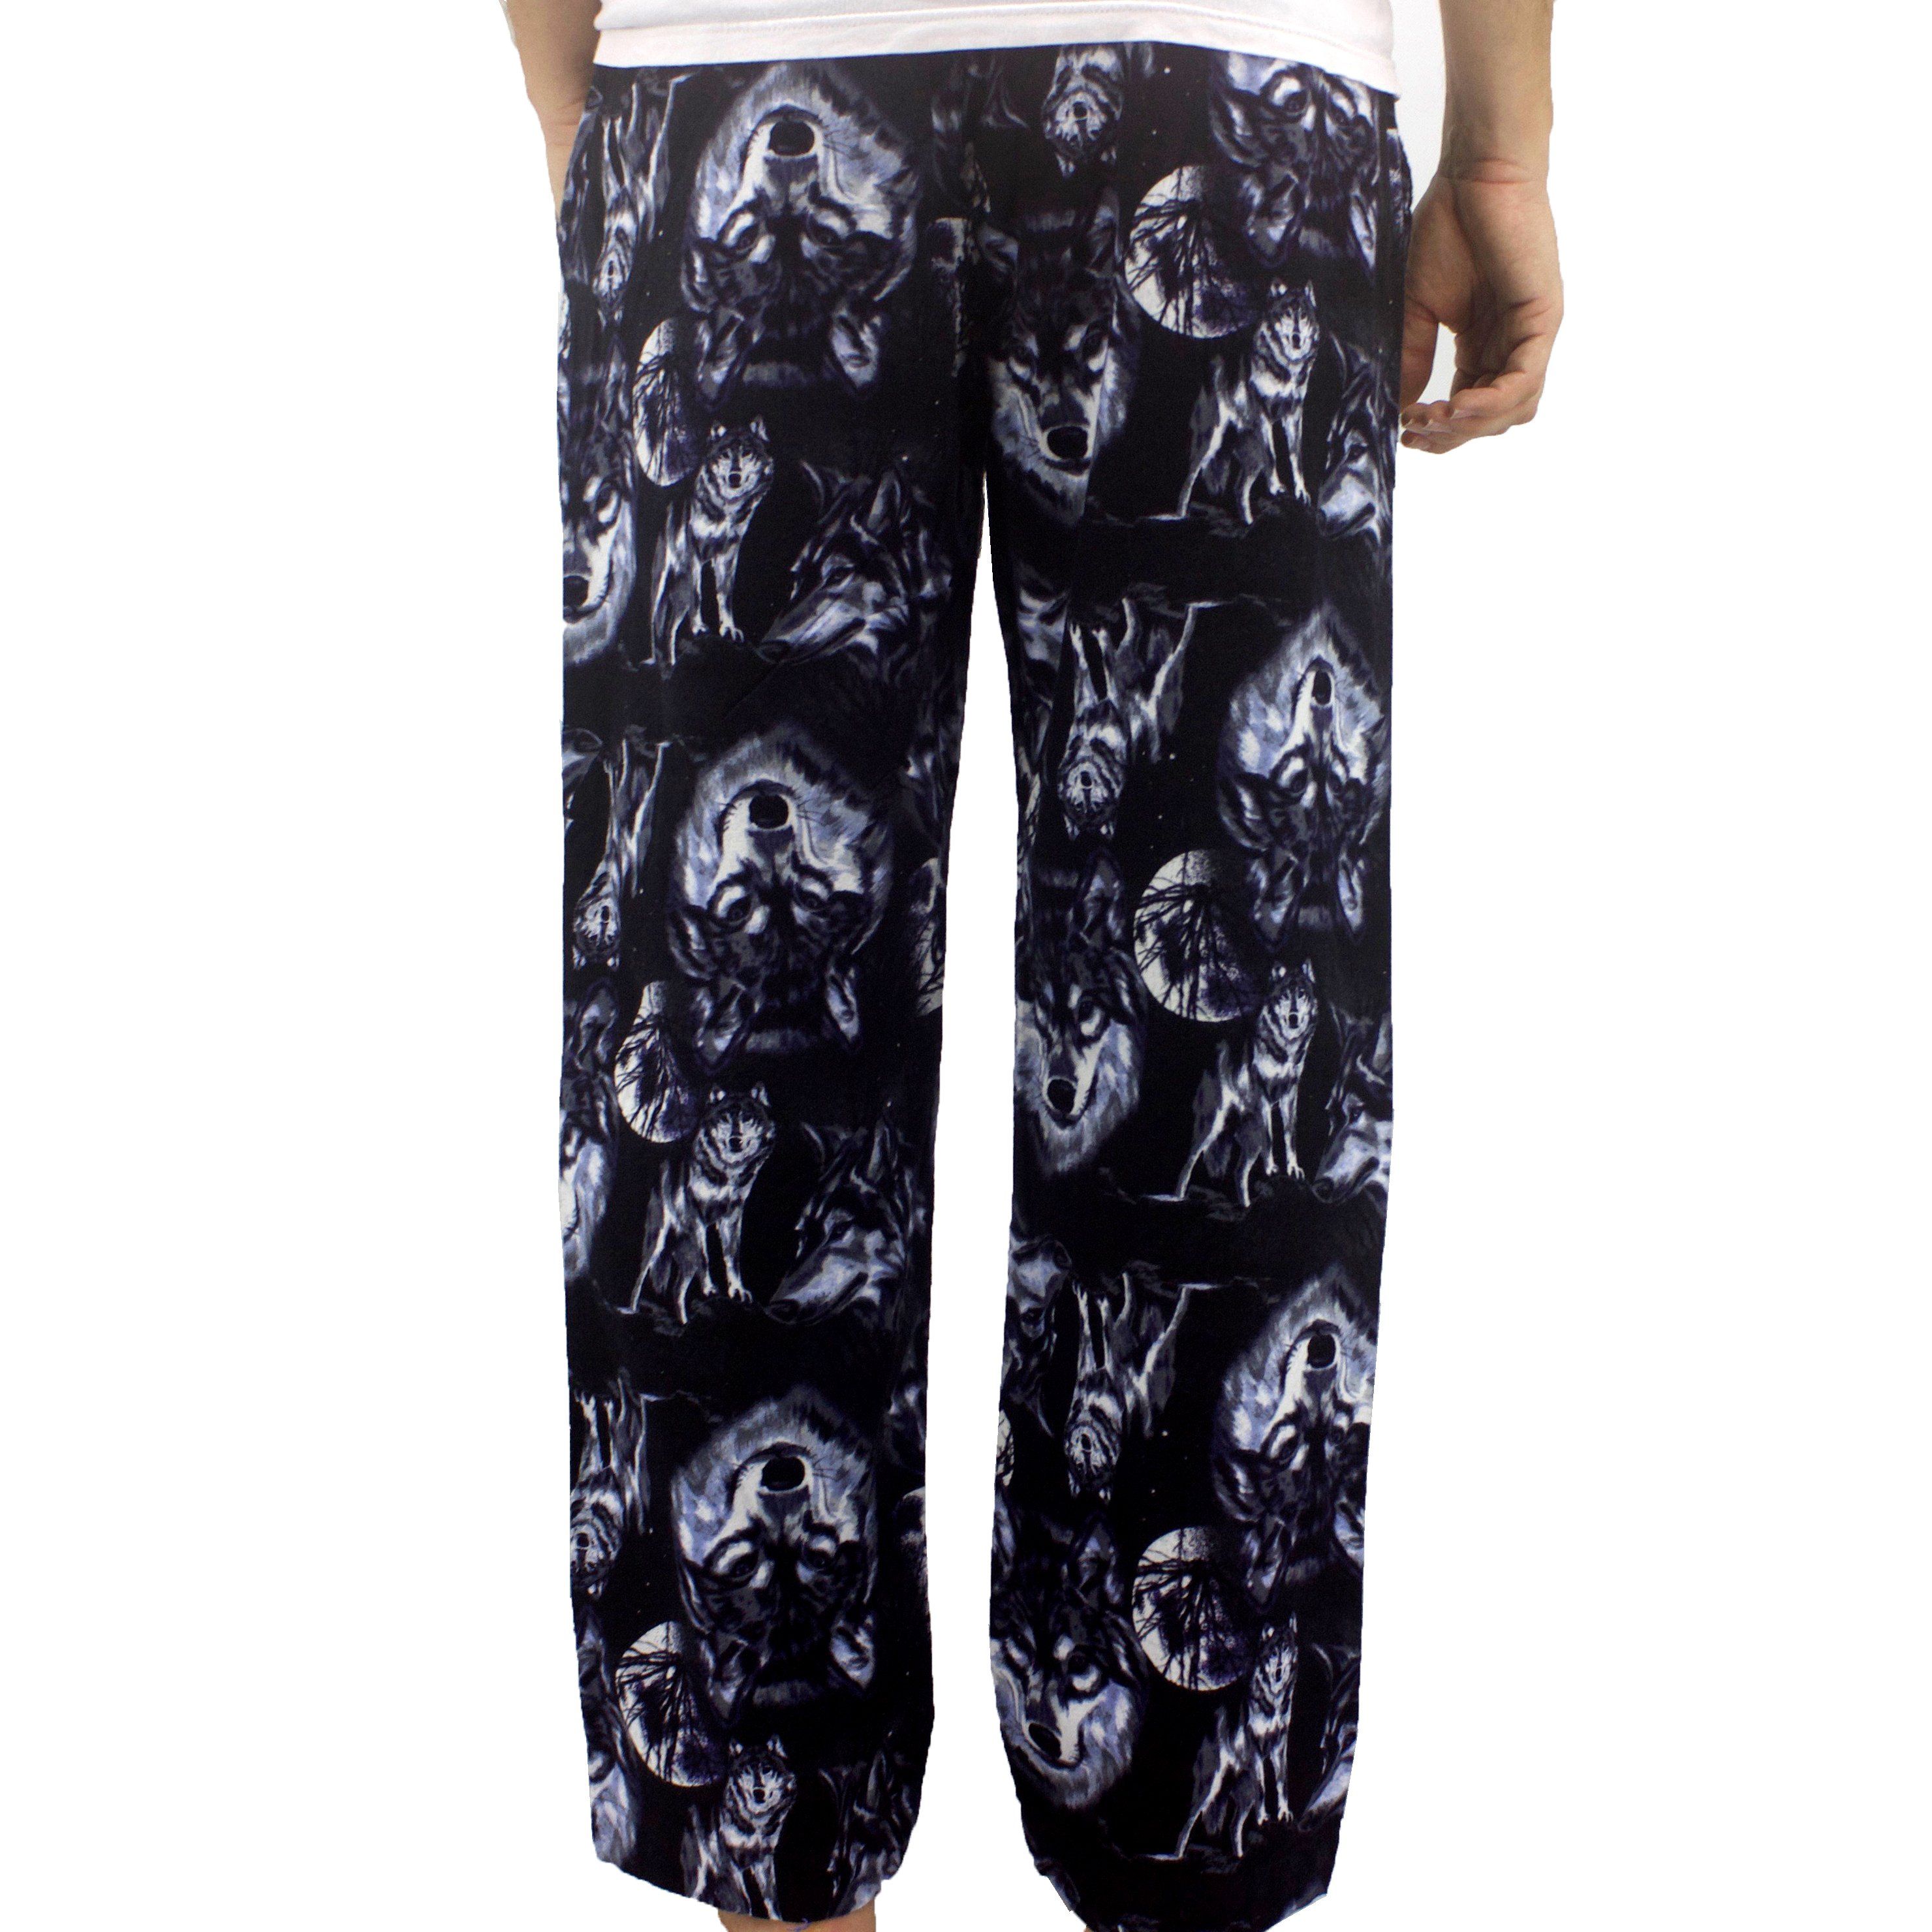 Wolves All Over Print Soft Warm Cotton Flannel Pj Pajama Pants for Men in Black